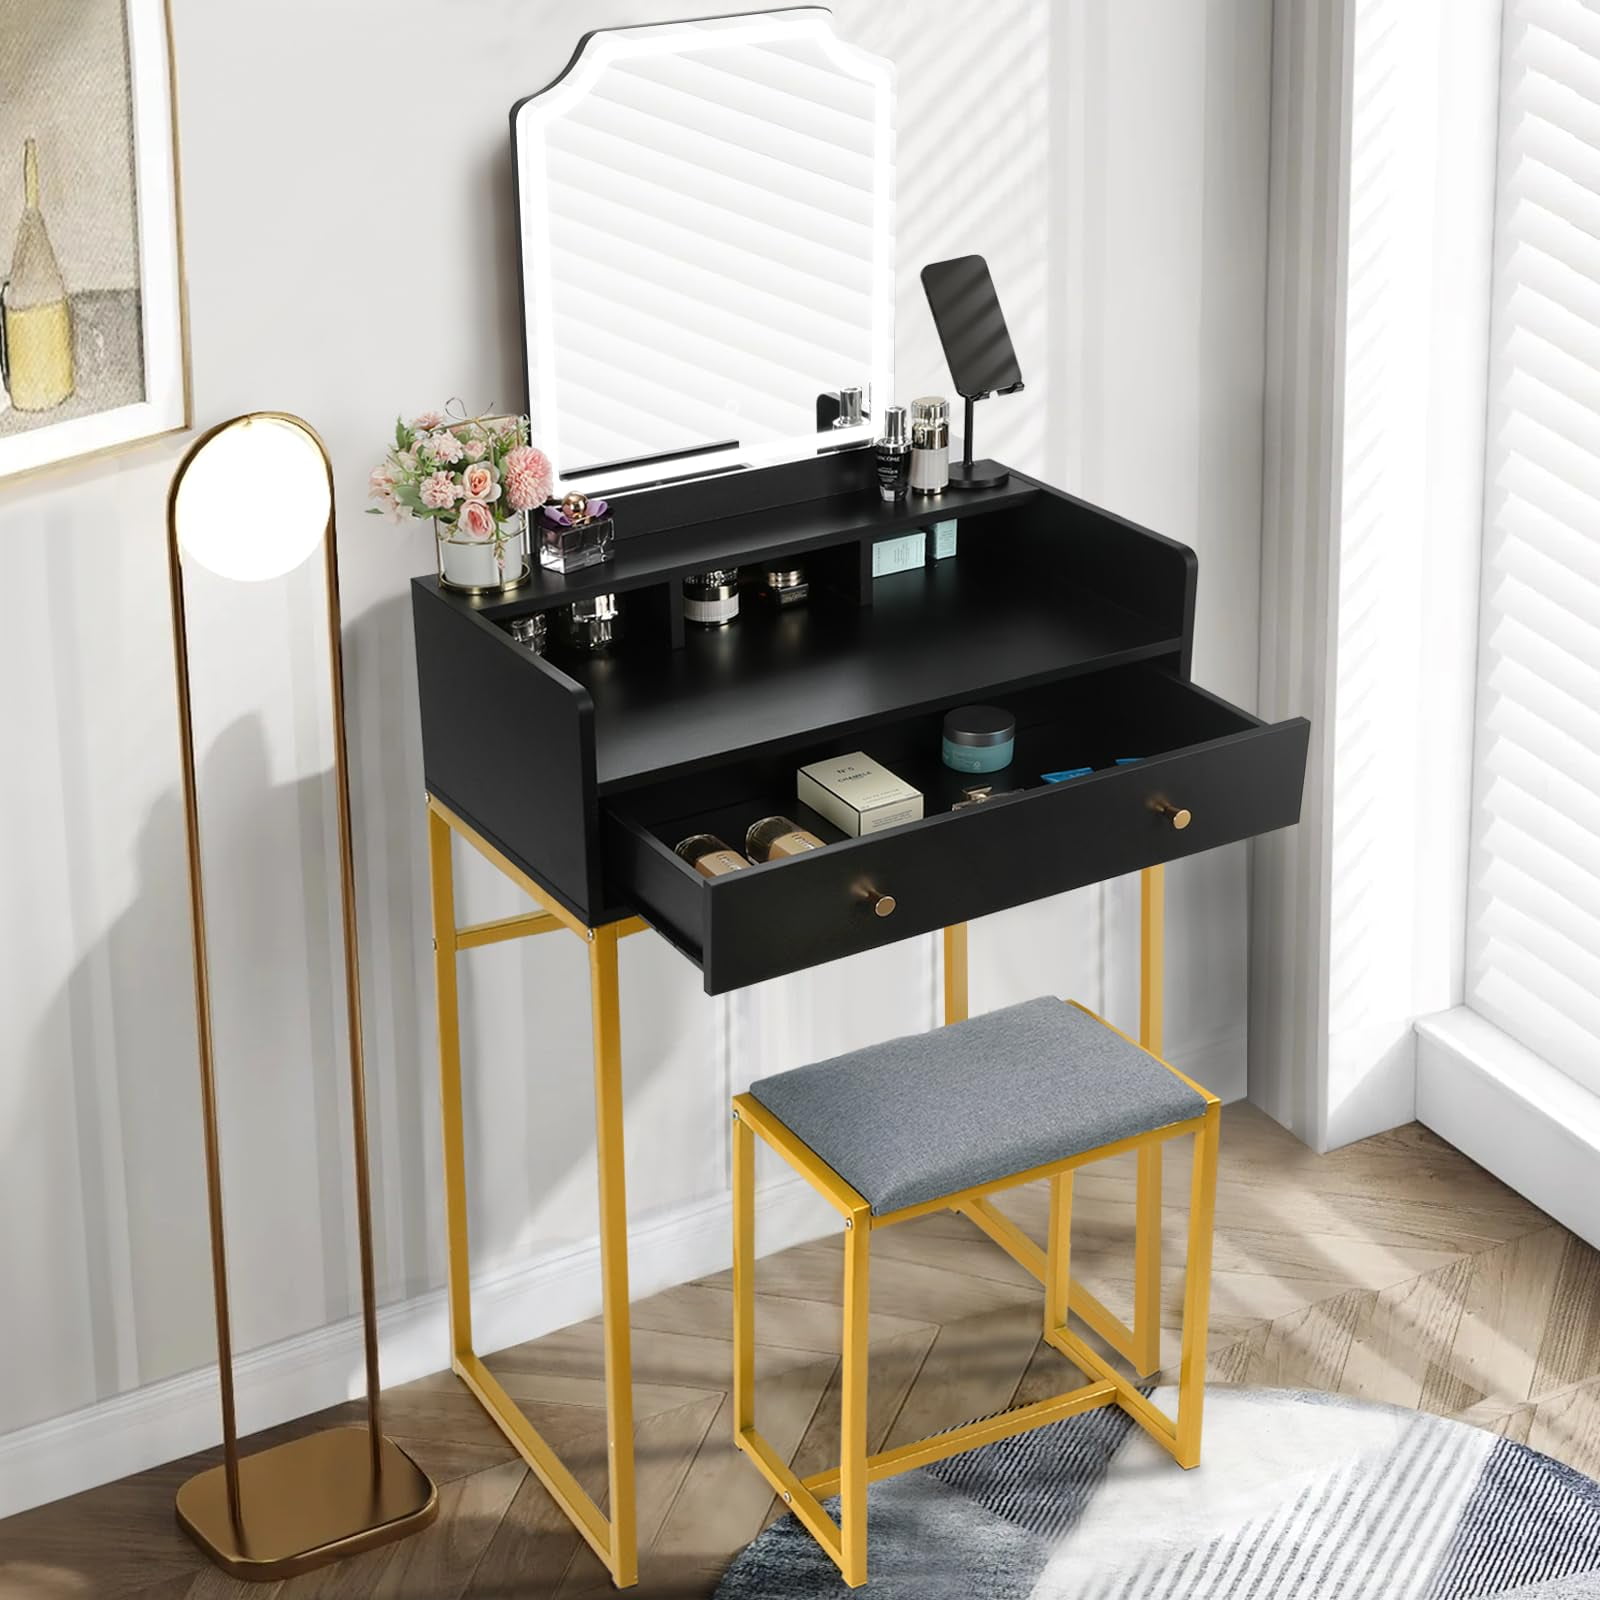 KEUVEN Vanity Desk with Flip Top Mirror and Lights, Makeup Table with 3 Drawers and Stool Storage, Vanity Mirror with Lights 3 Color Dimmable for